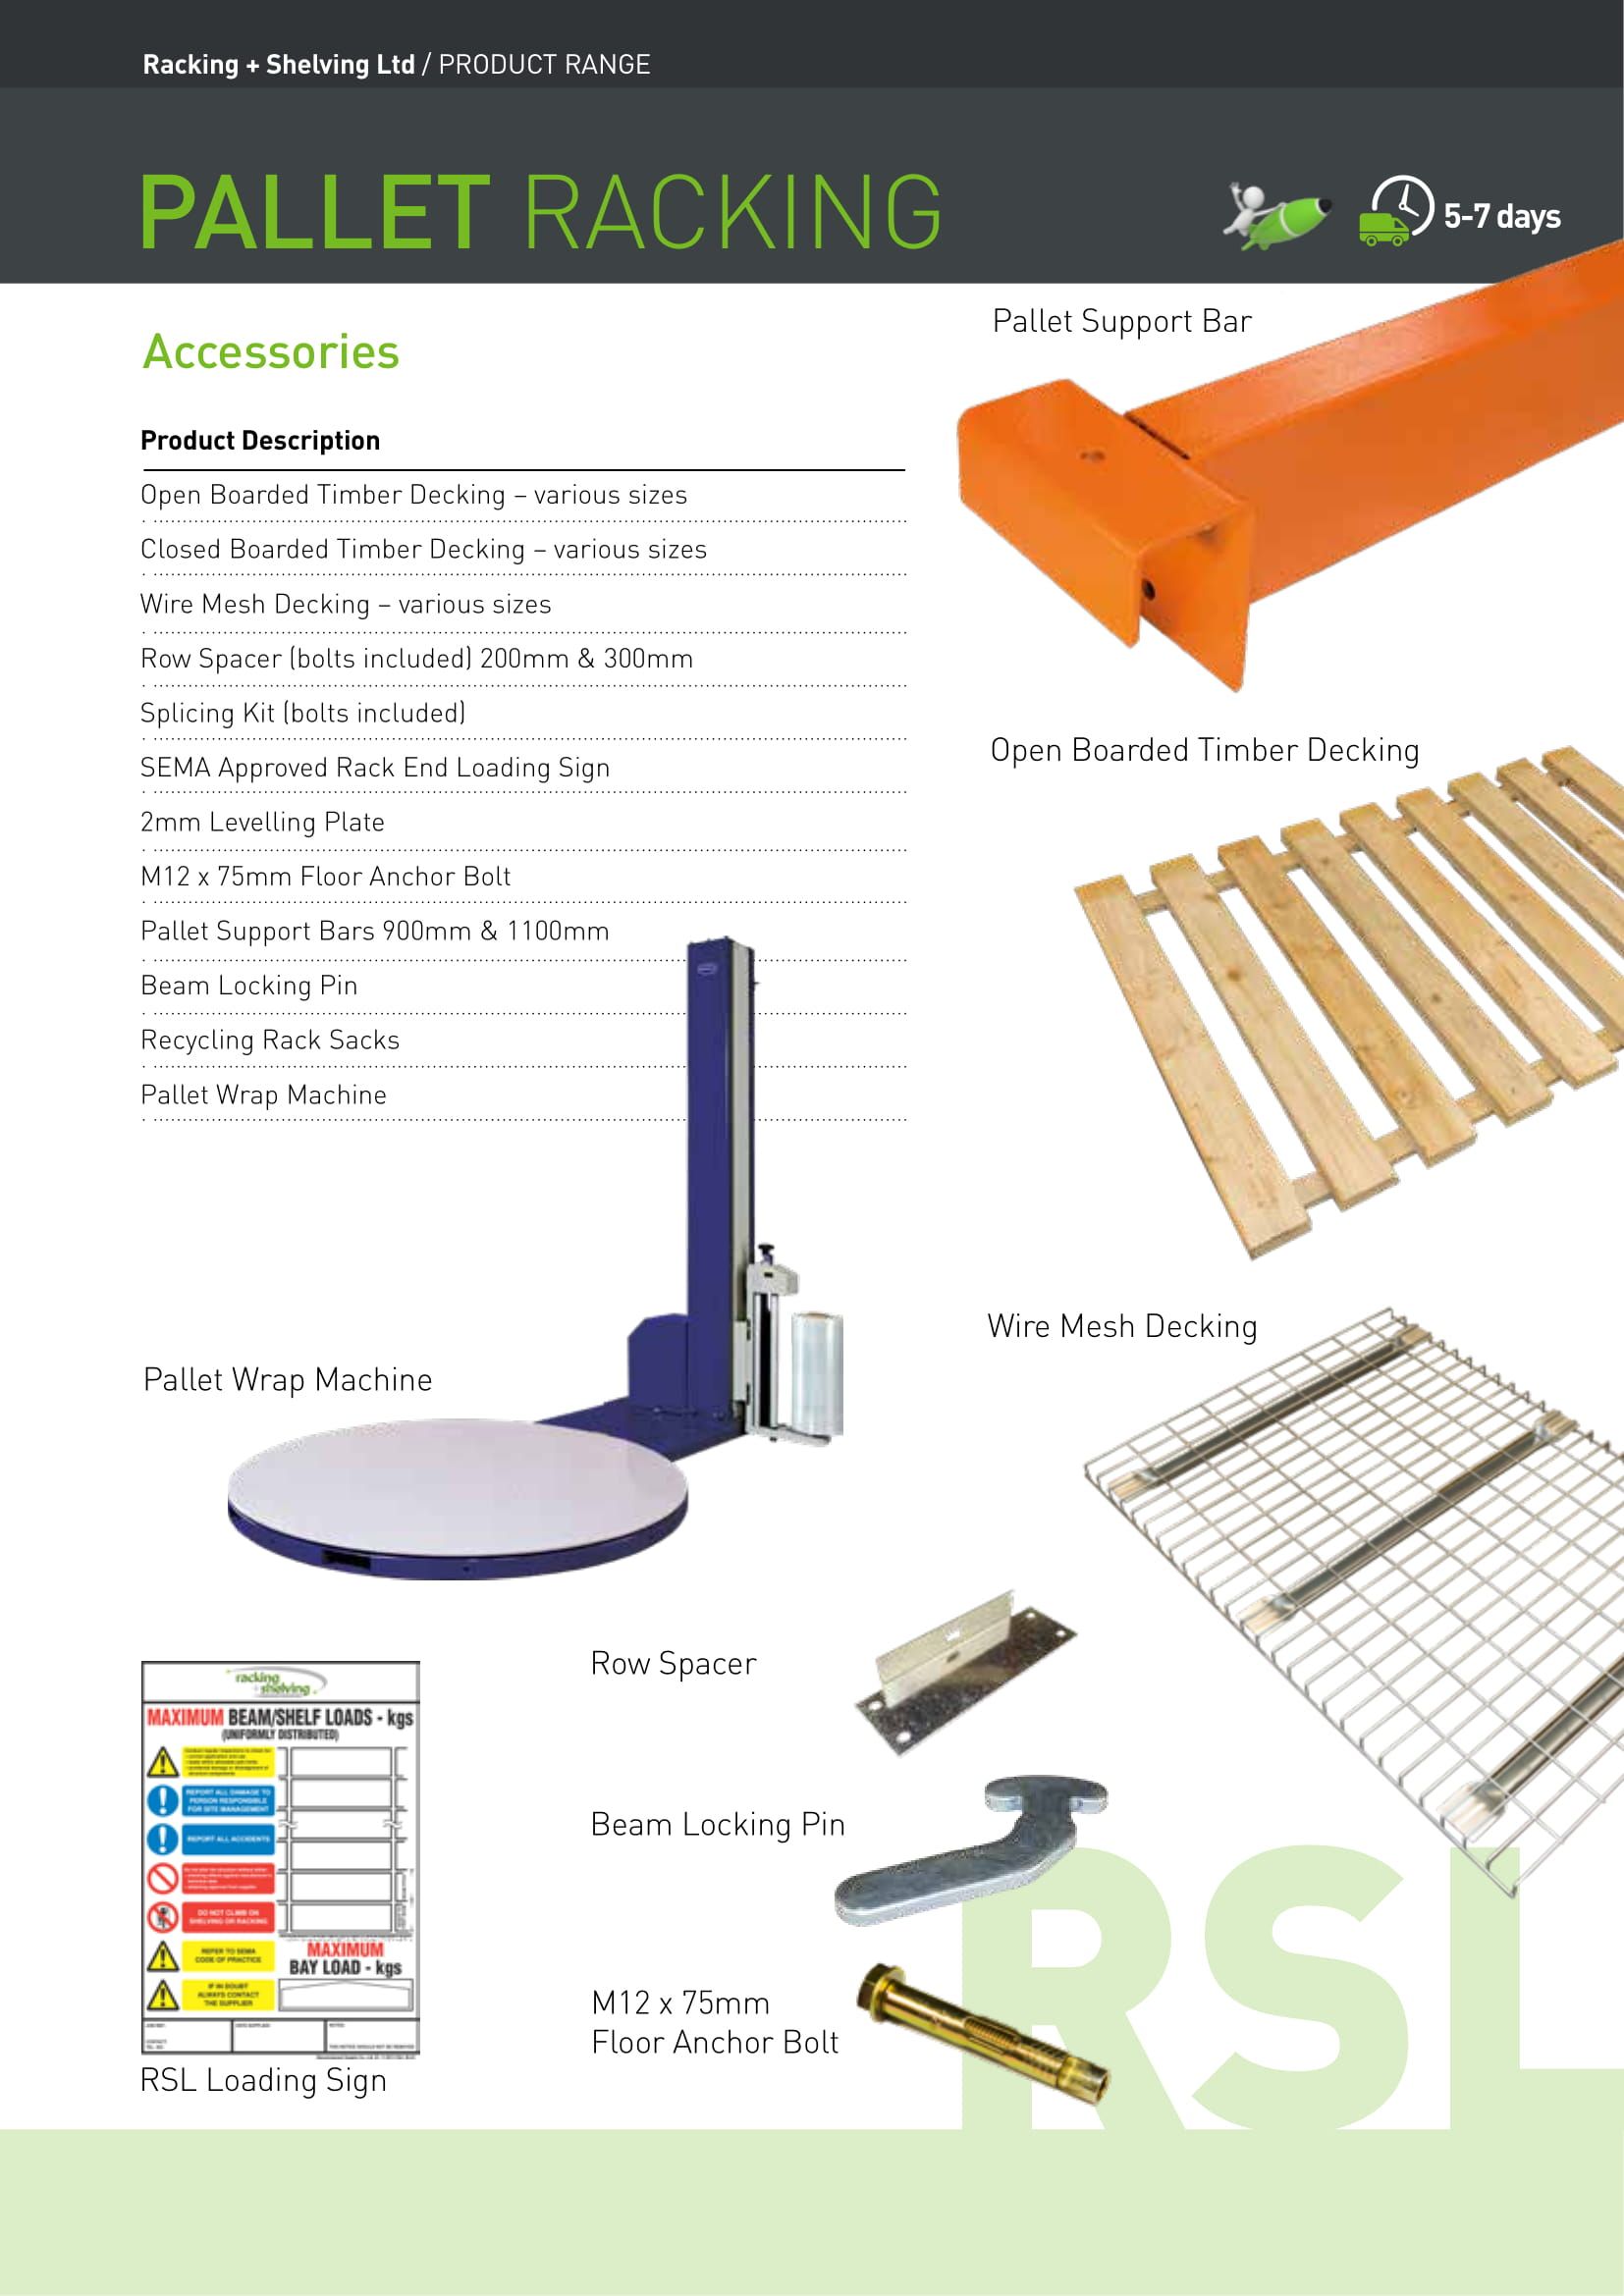 Pallet racking brochure page showcasing various rack components